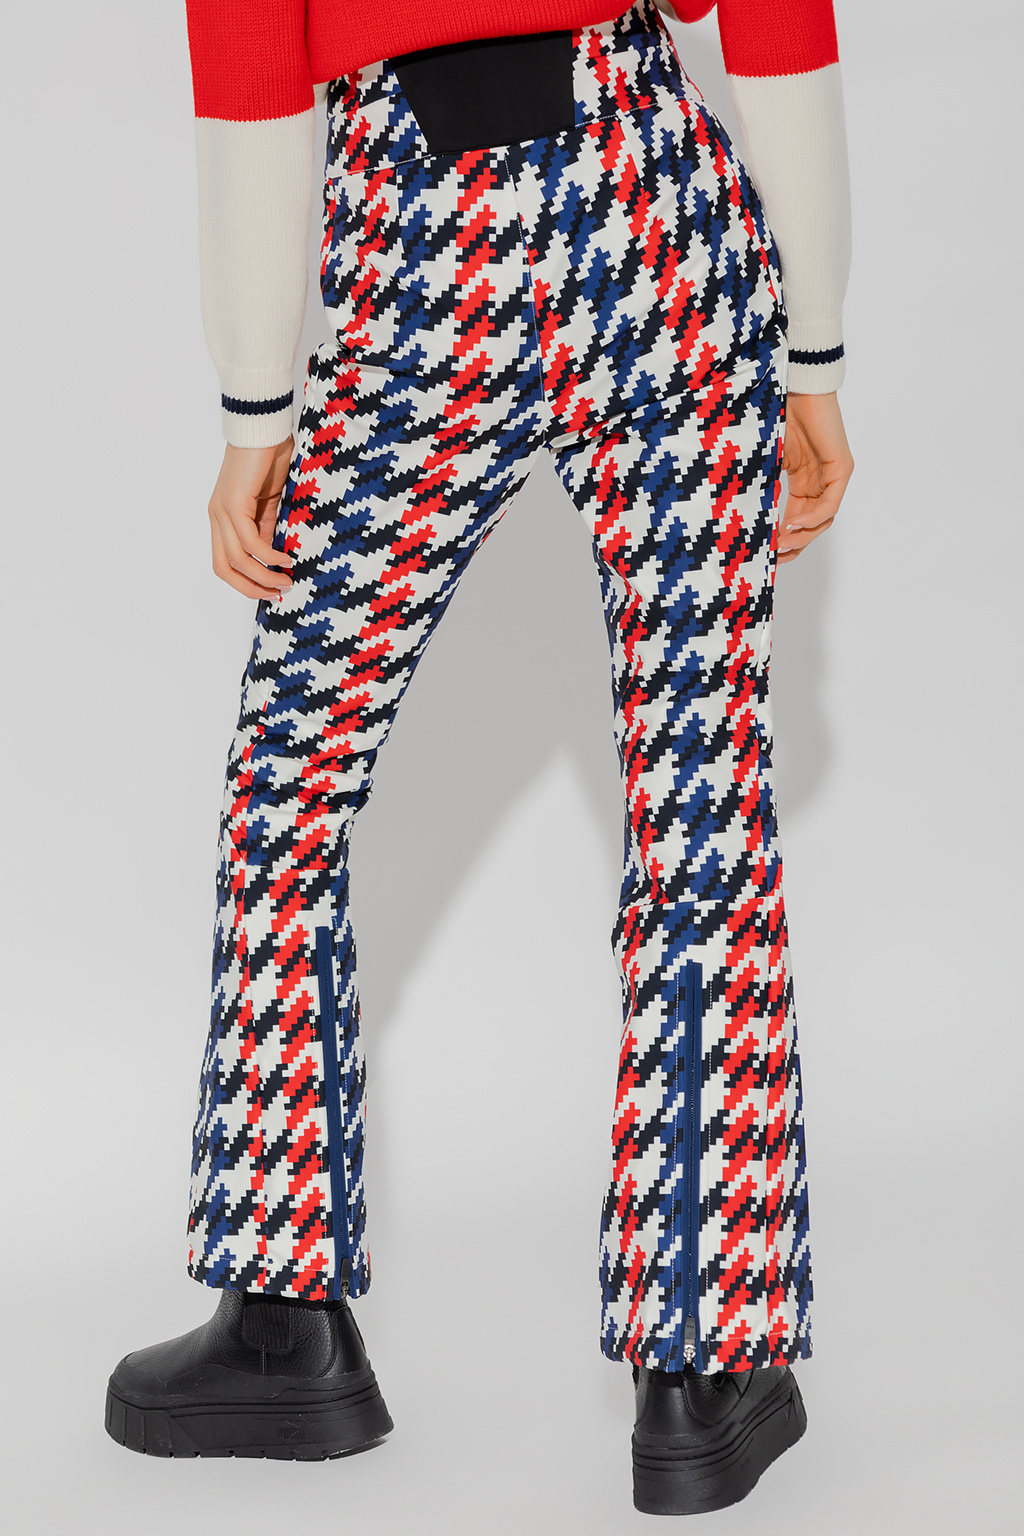 PERFECT MOMENT Aurora padded houndstooth flared ski pants